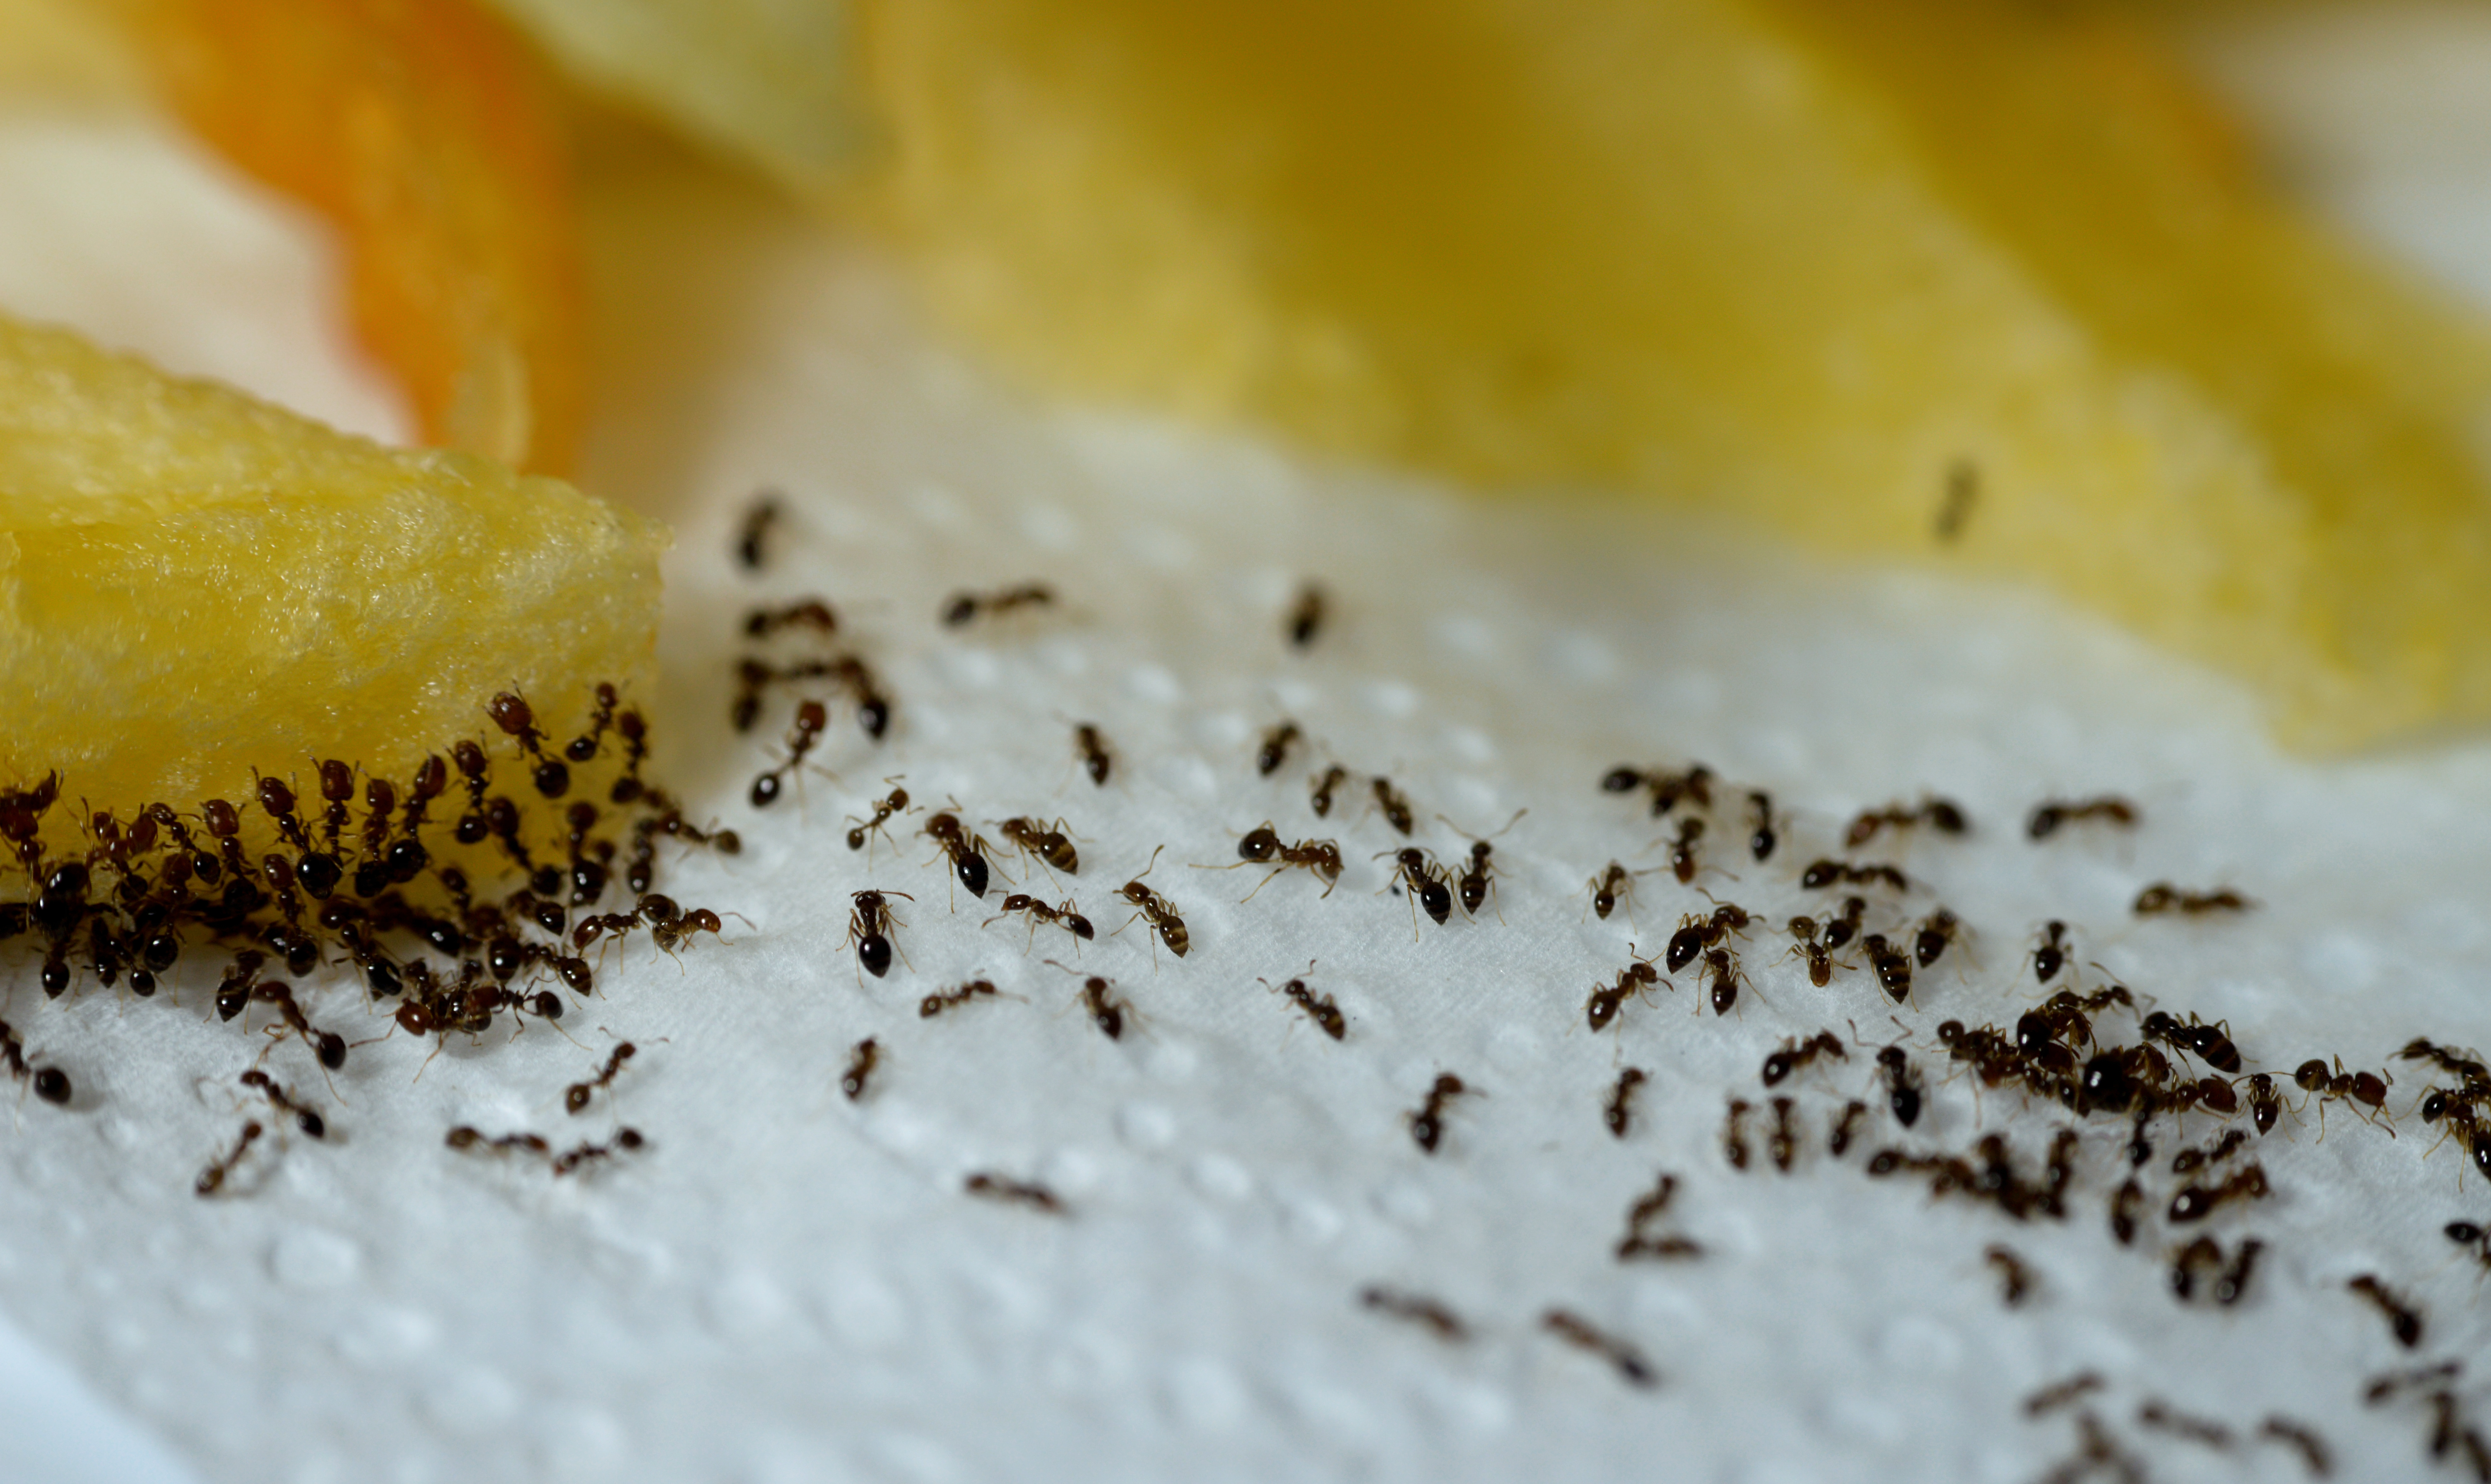 An image of little black ants swarming food - learn how GGA Pest Management can help you control little black ant infestations in Waco, TX.